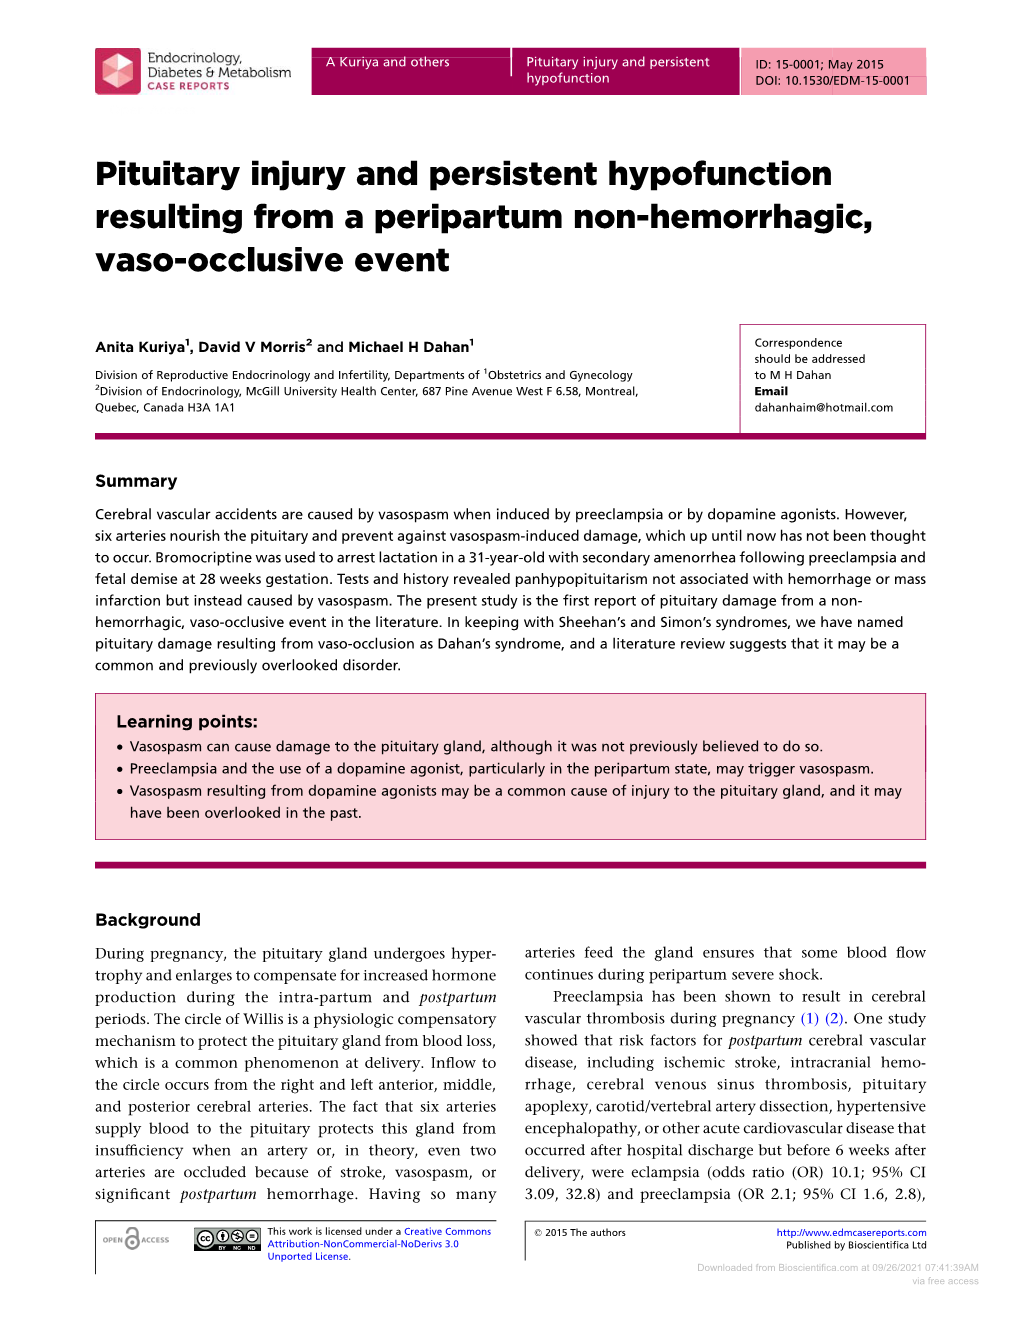 Pituitary Injury and Persistent Hypofunction Resulting from a Peripartum Non-Hemorrhagic, Vaso-Occlusive Event